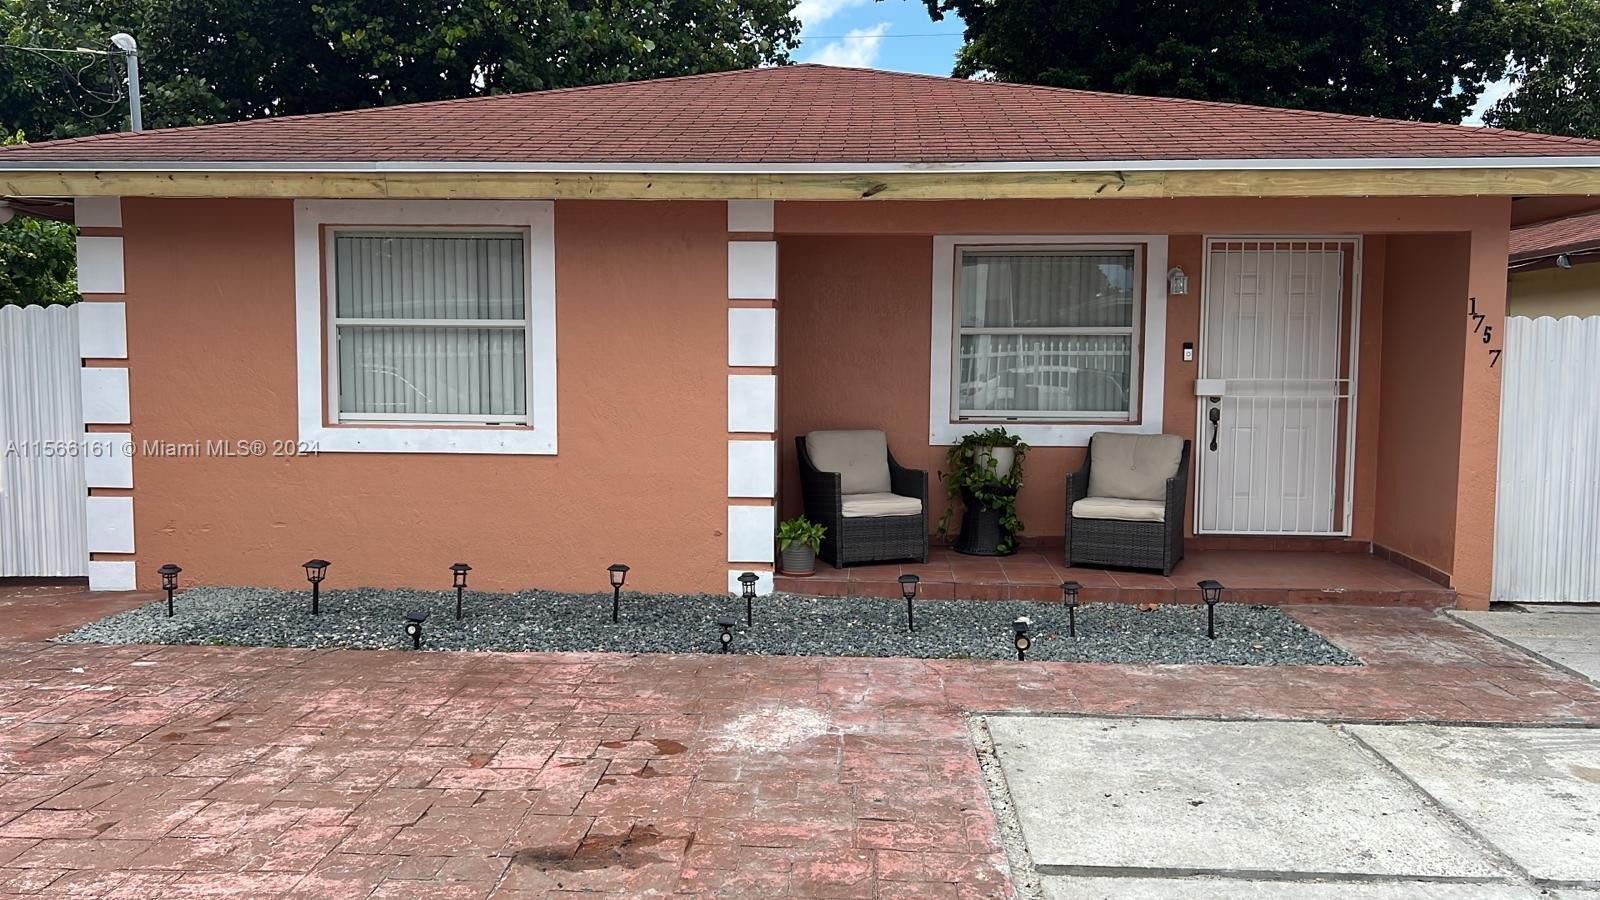 Photo of 1757 NW 66th St in Miami, FL